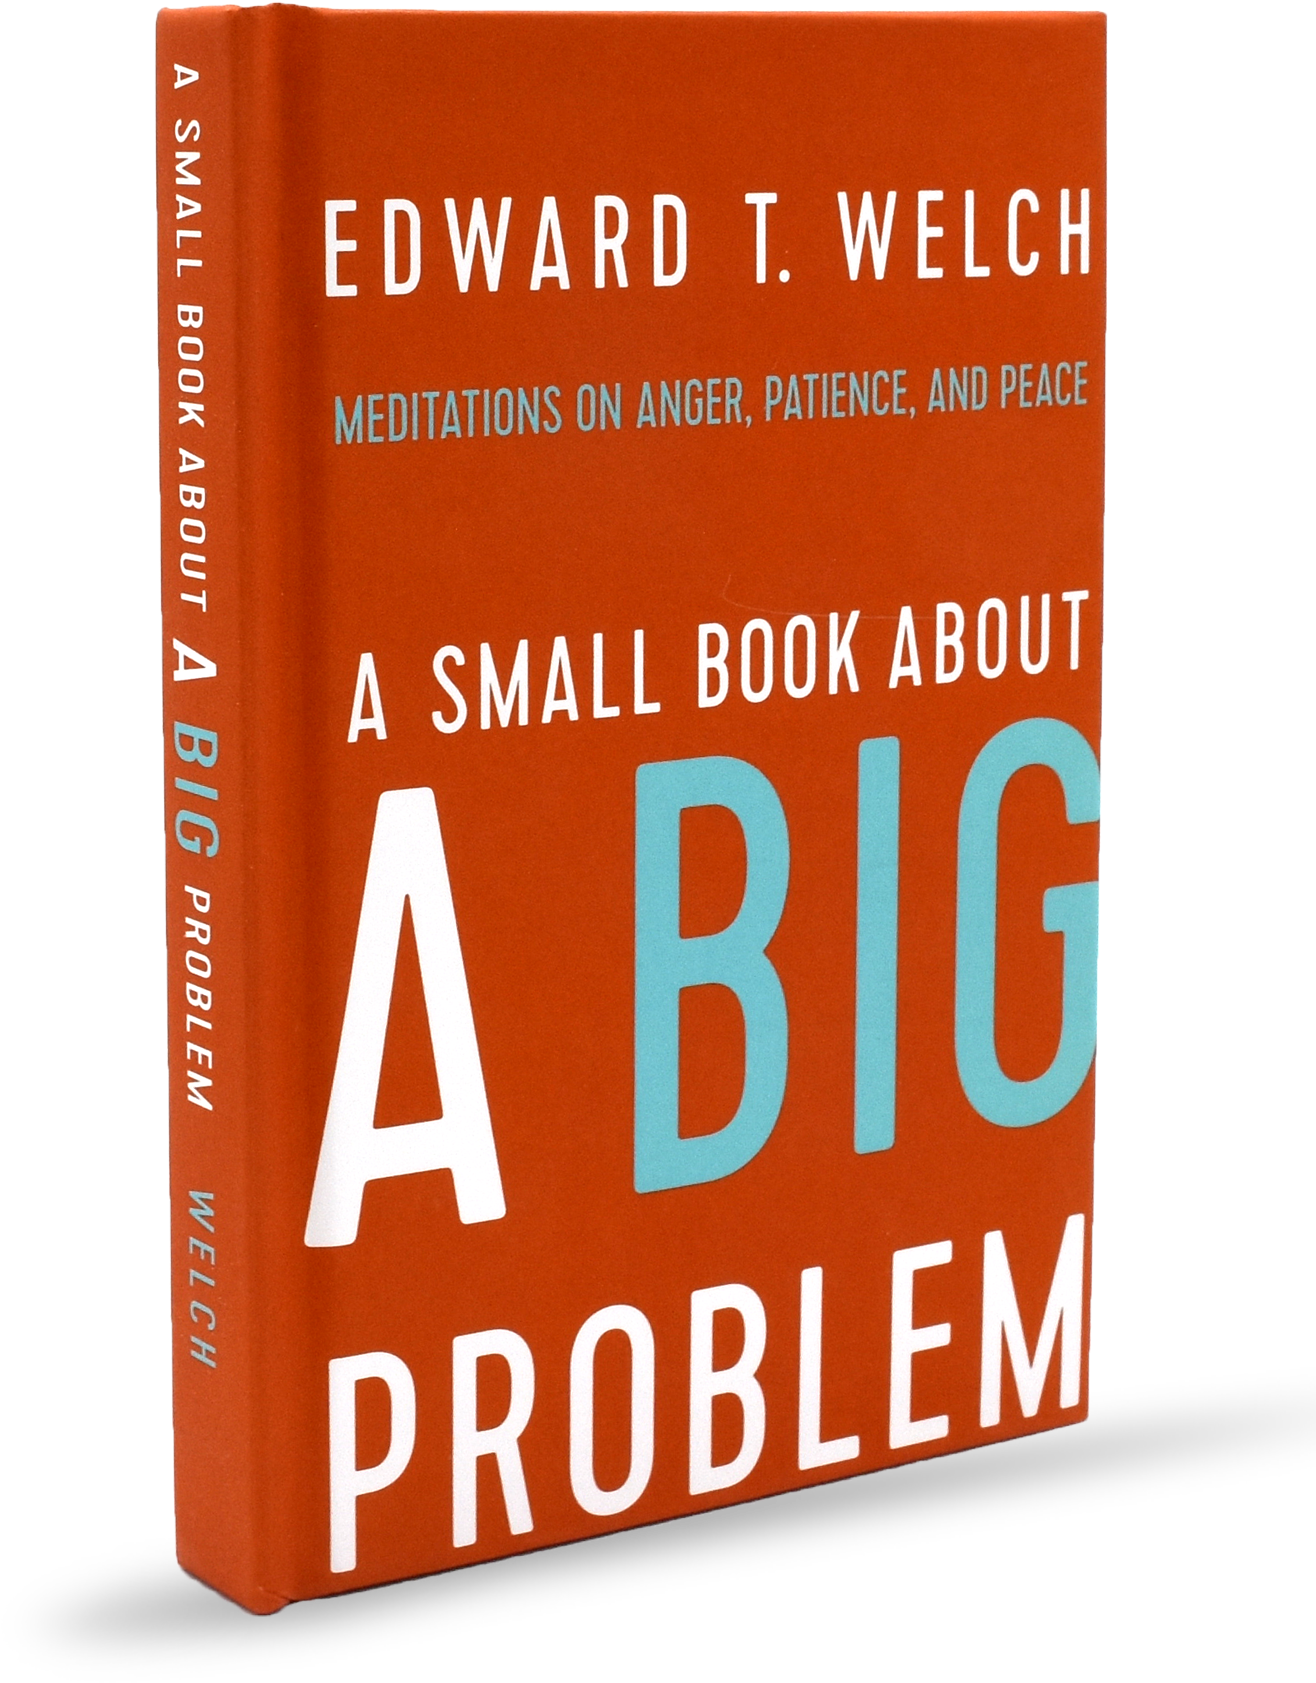 A Small Book About A Big Problem Cover PNG image